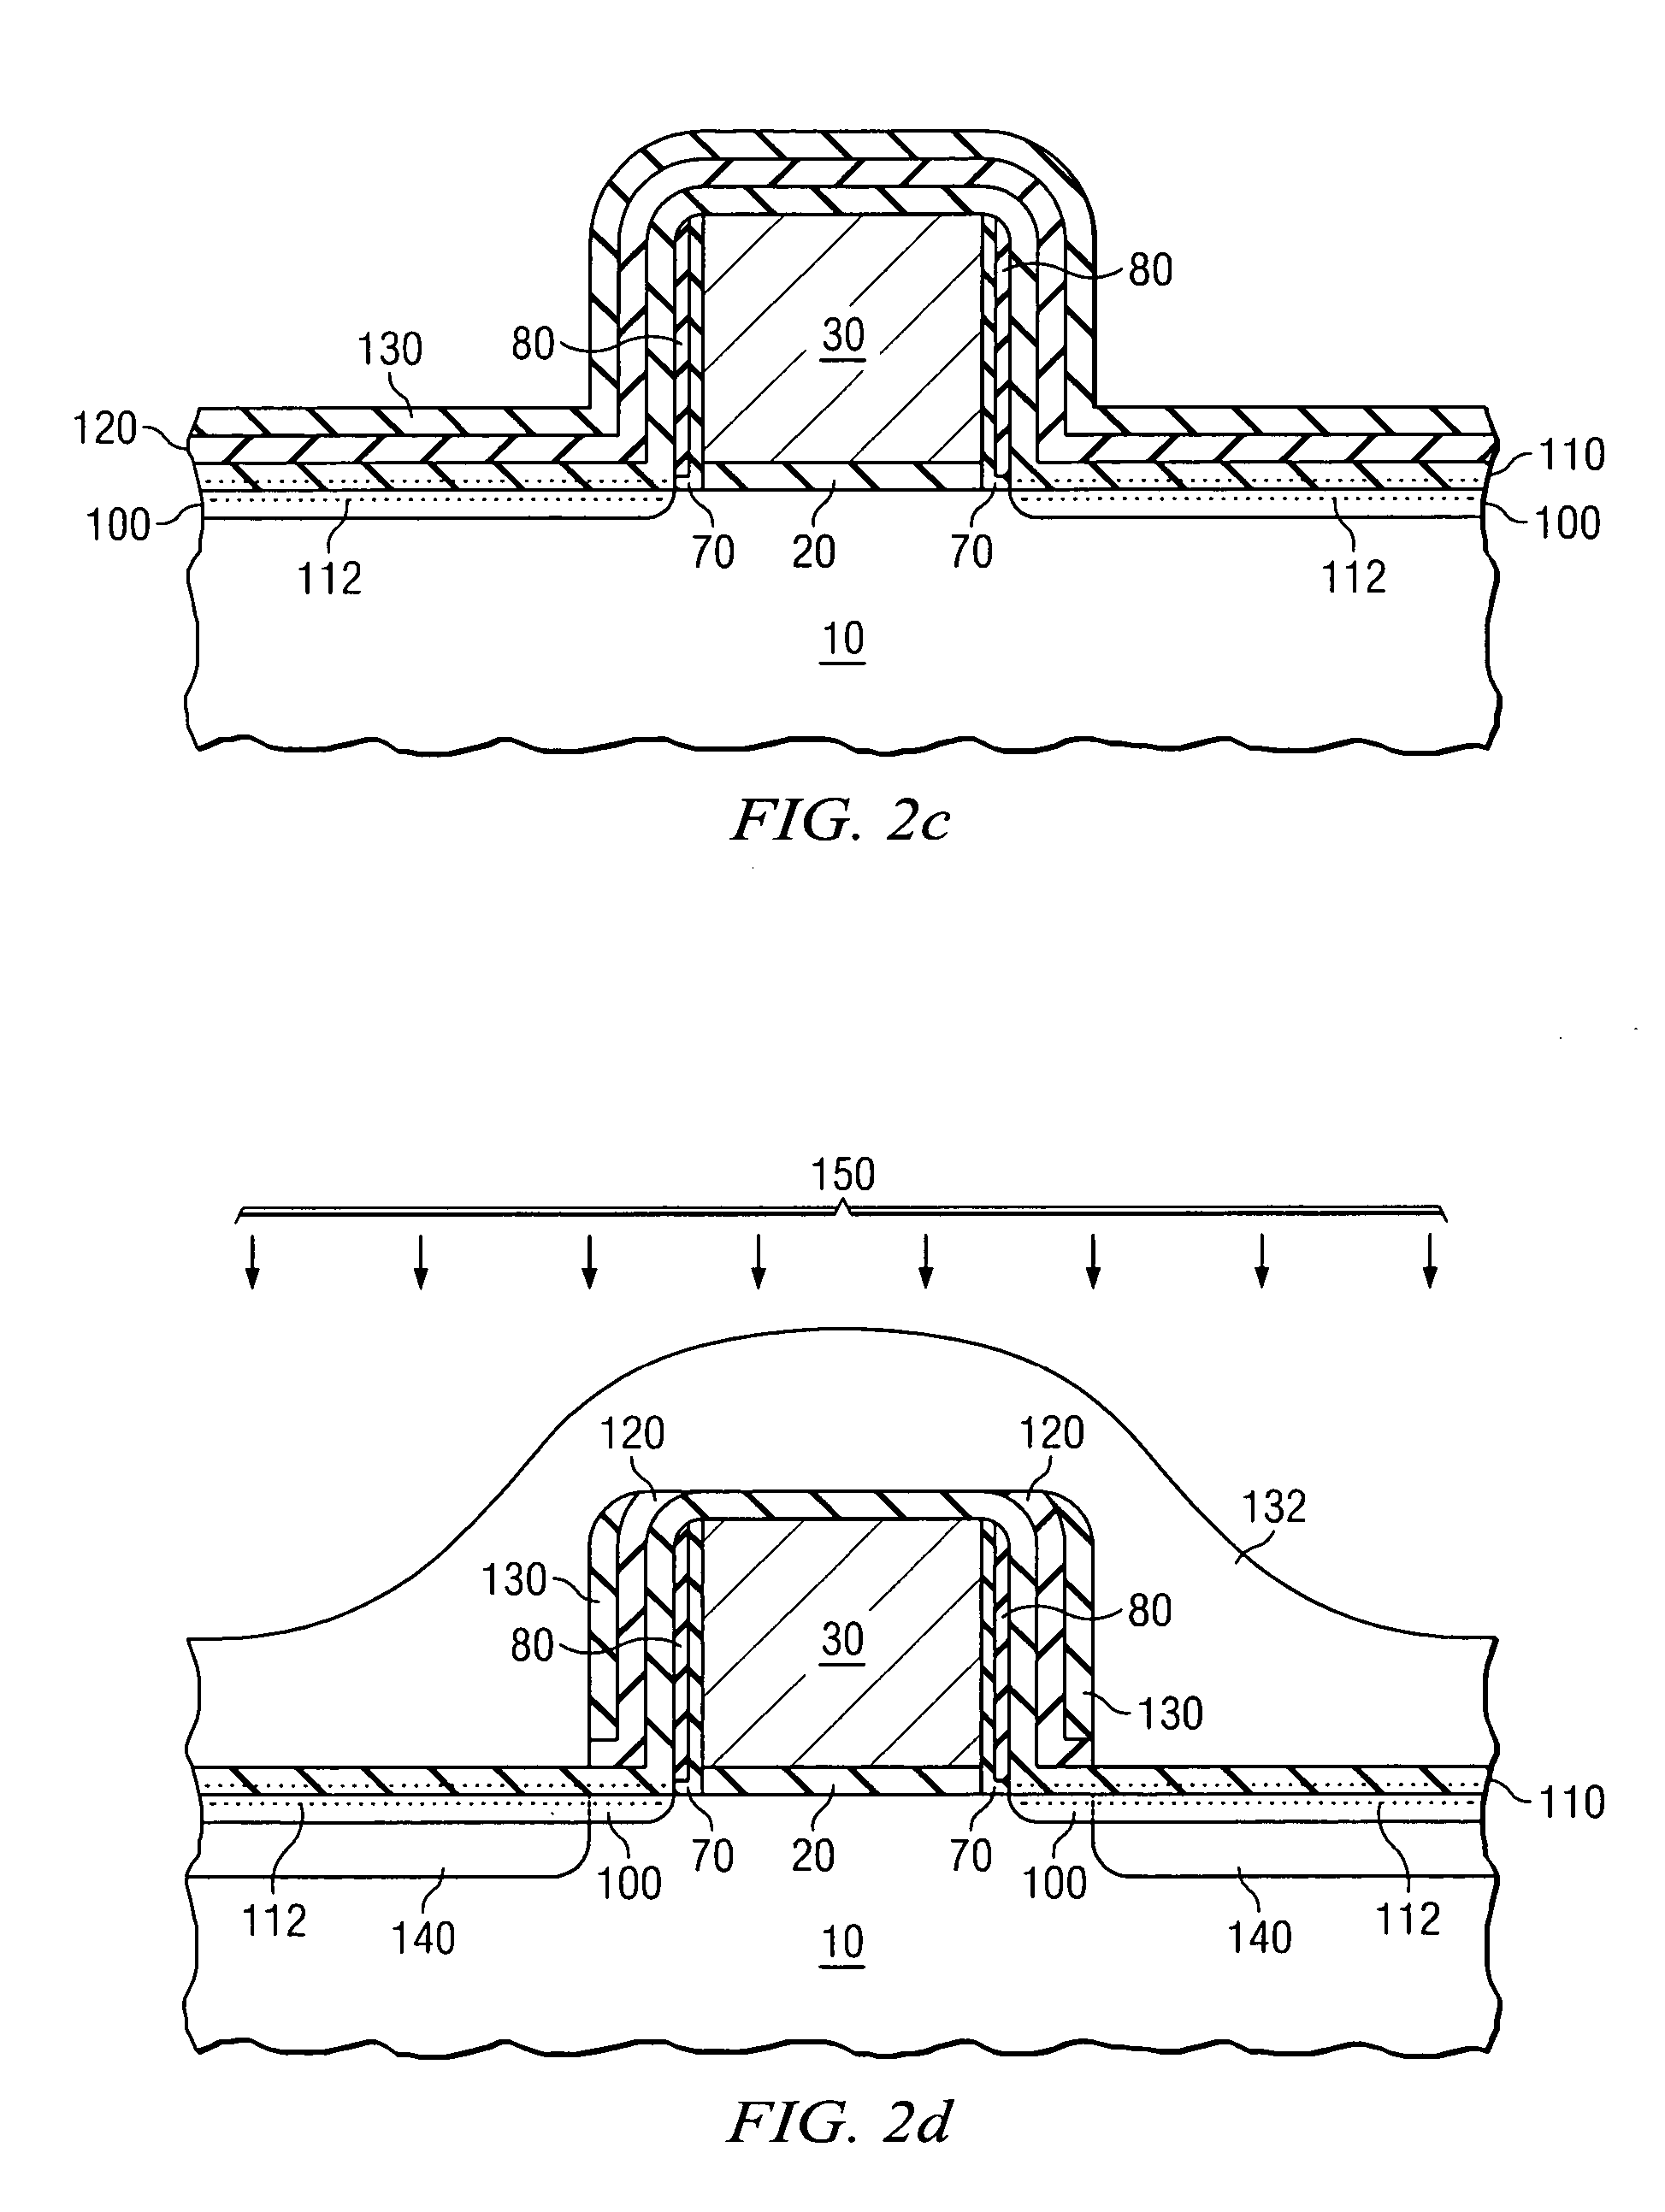 CMOS transistors and methods of forming same